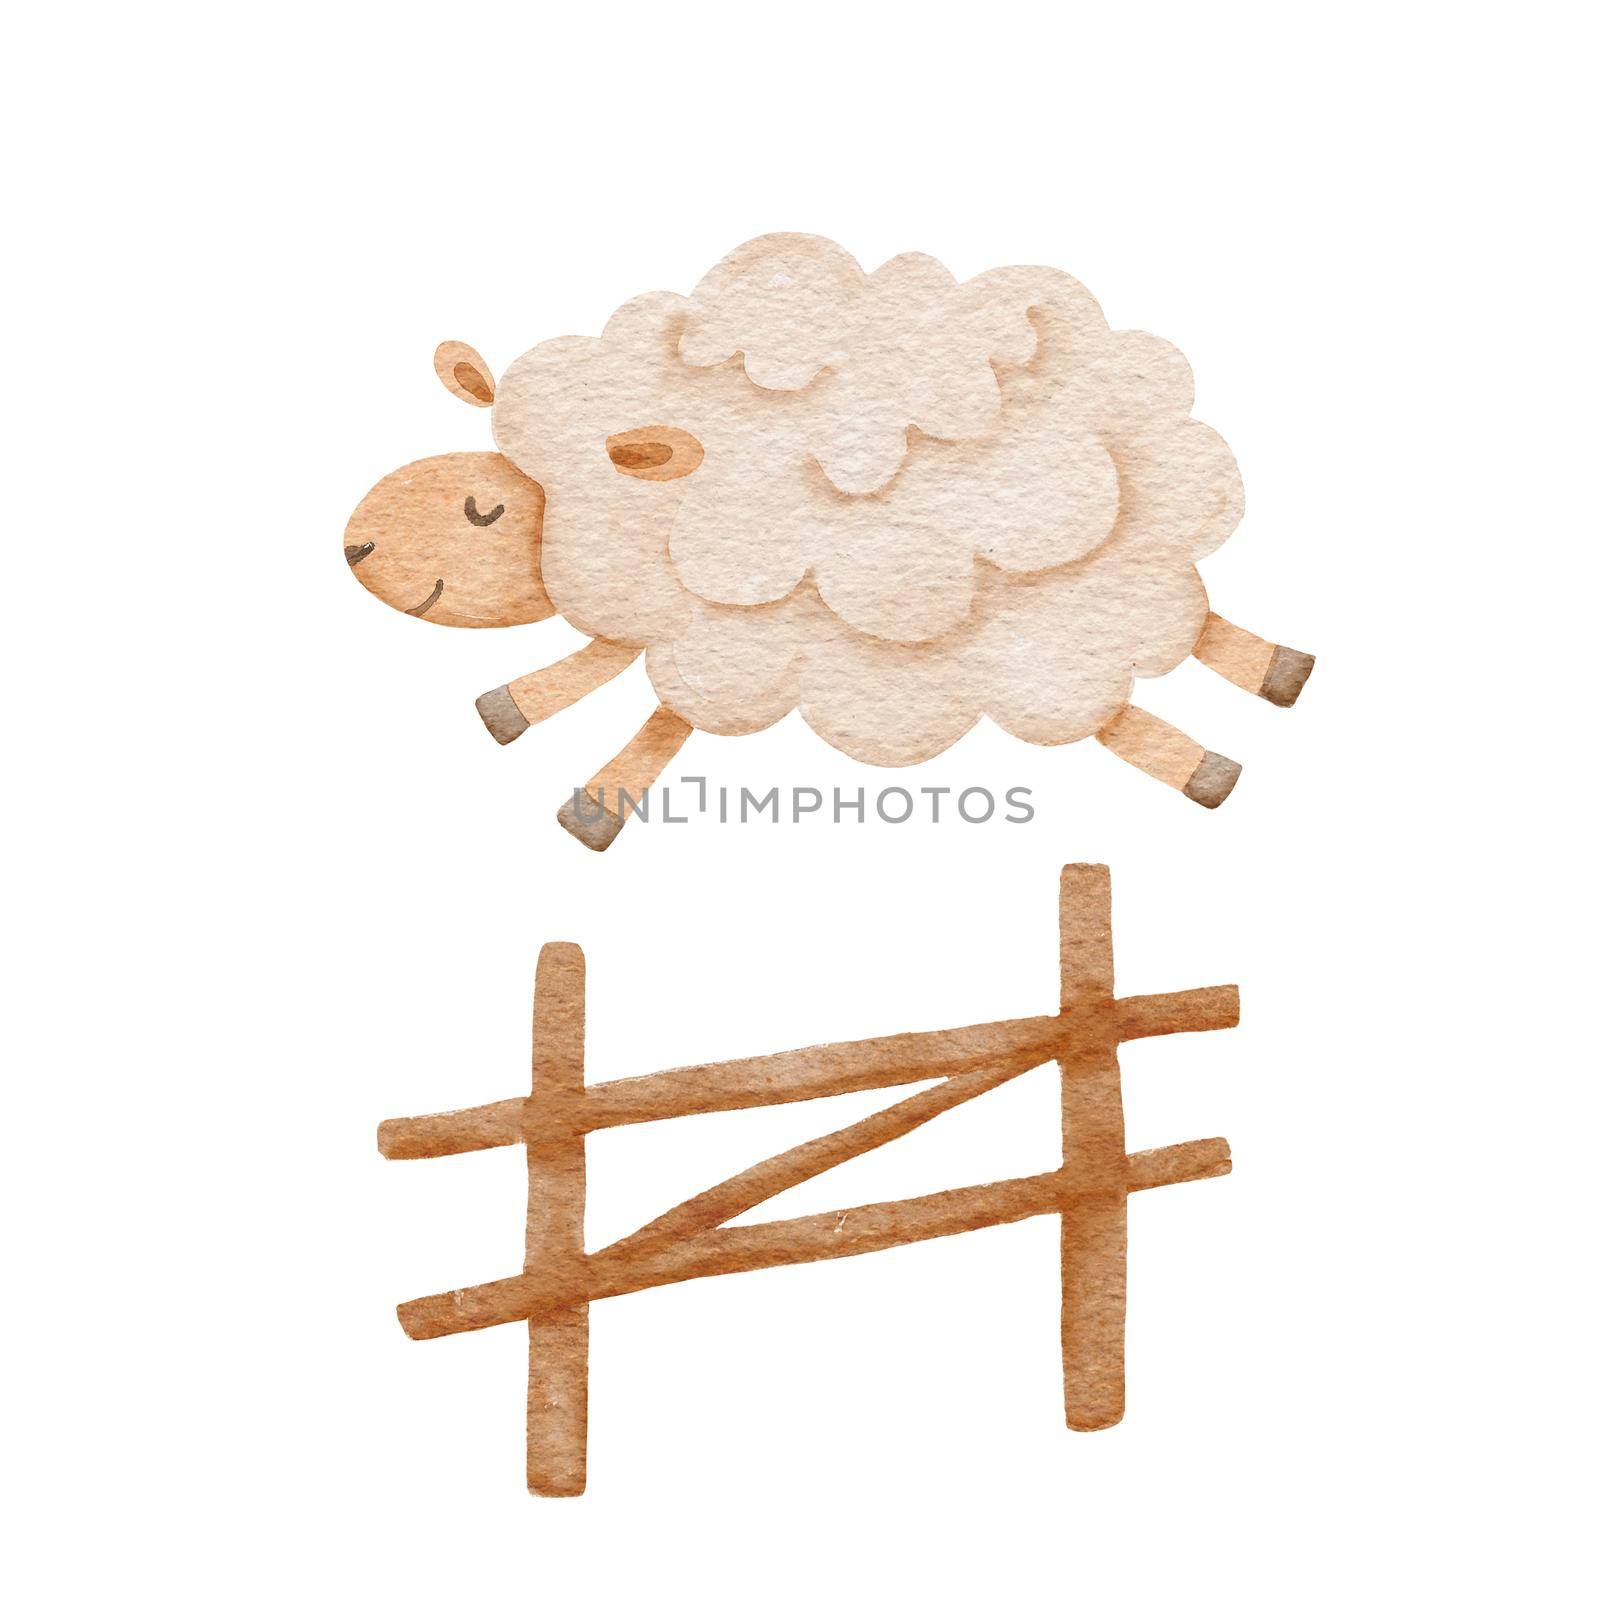 Cute cartoon sheep jumping over fence. Counting sheep to fall asleep. Good night sleep metaphor poster. waterolor illustration isolated on white. by ElenaPlatova